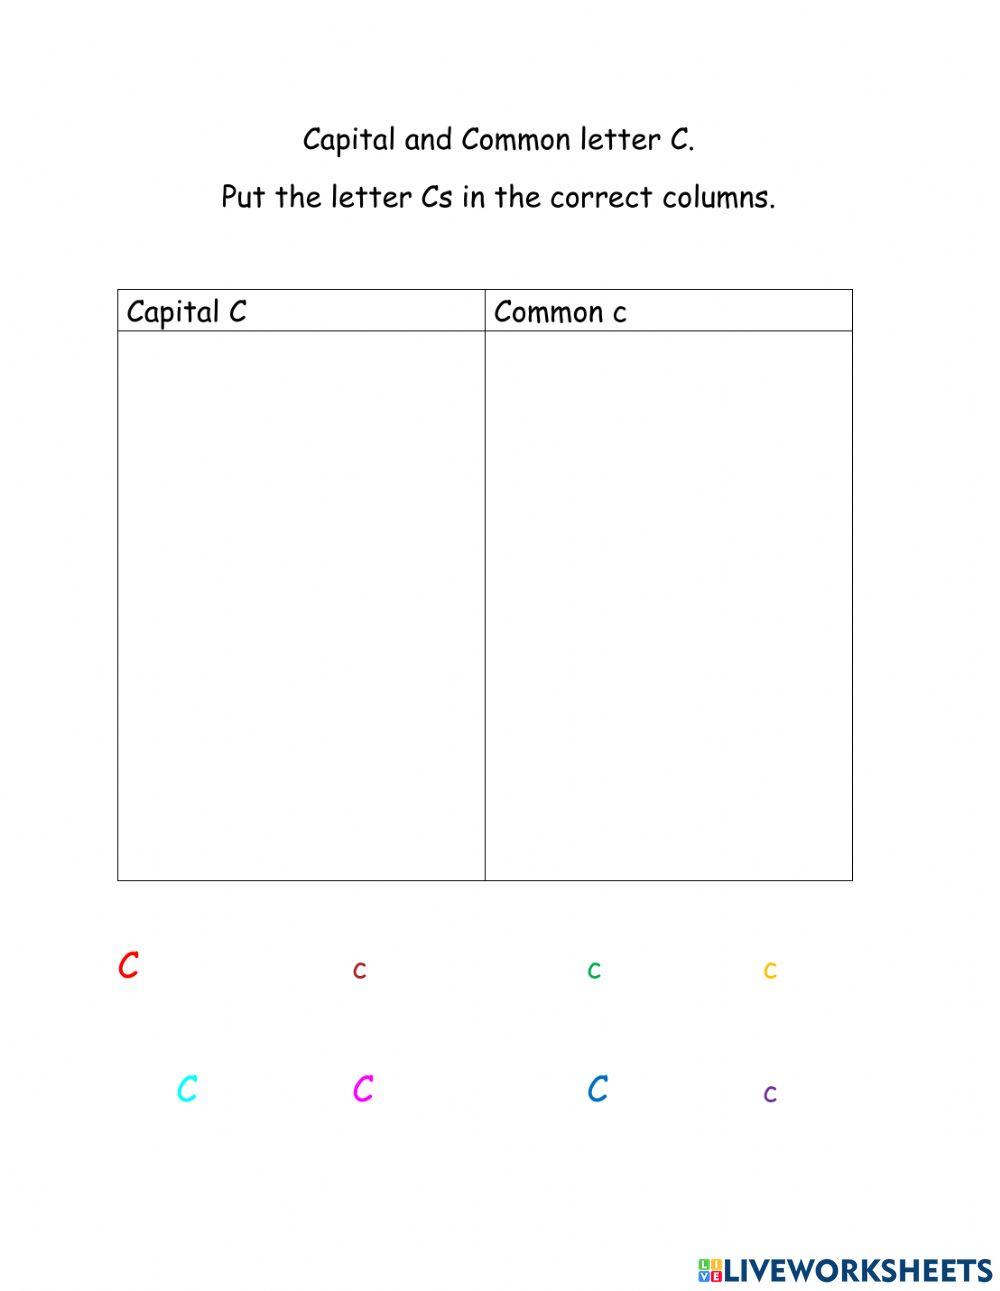 Capital and Common C